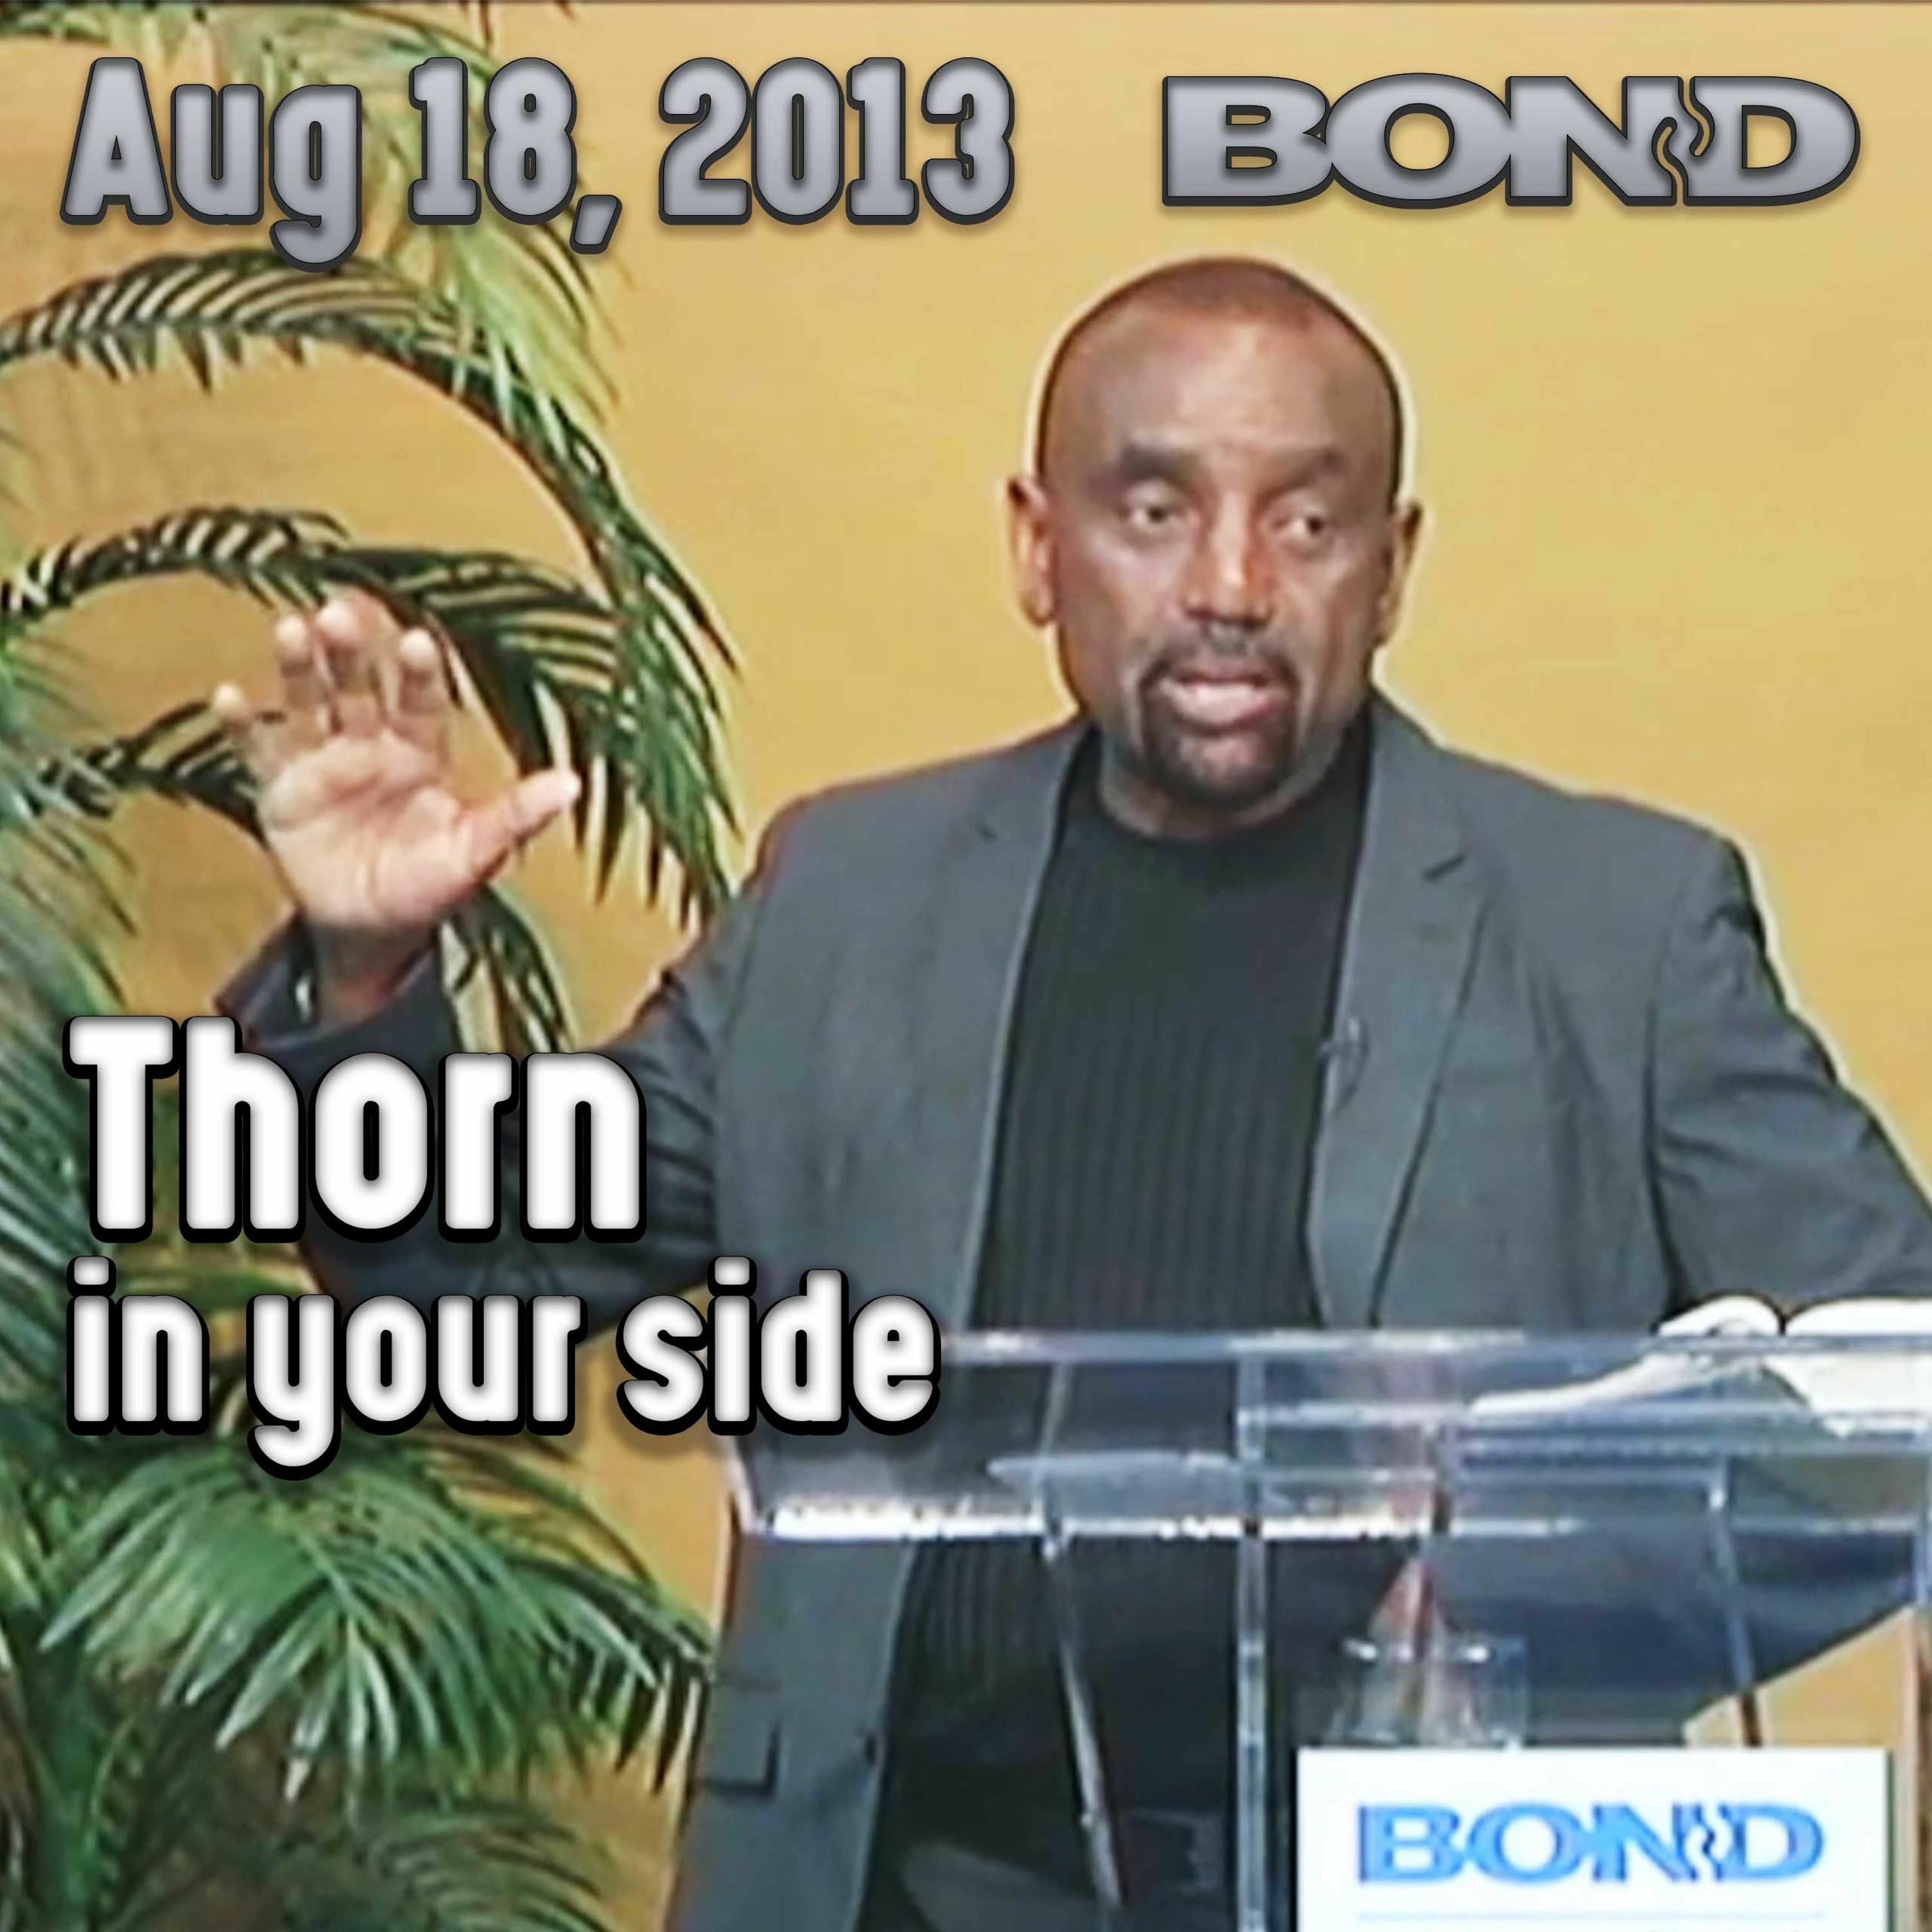 What Is the Thorn in Your Side? (Archive 8/18/13)